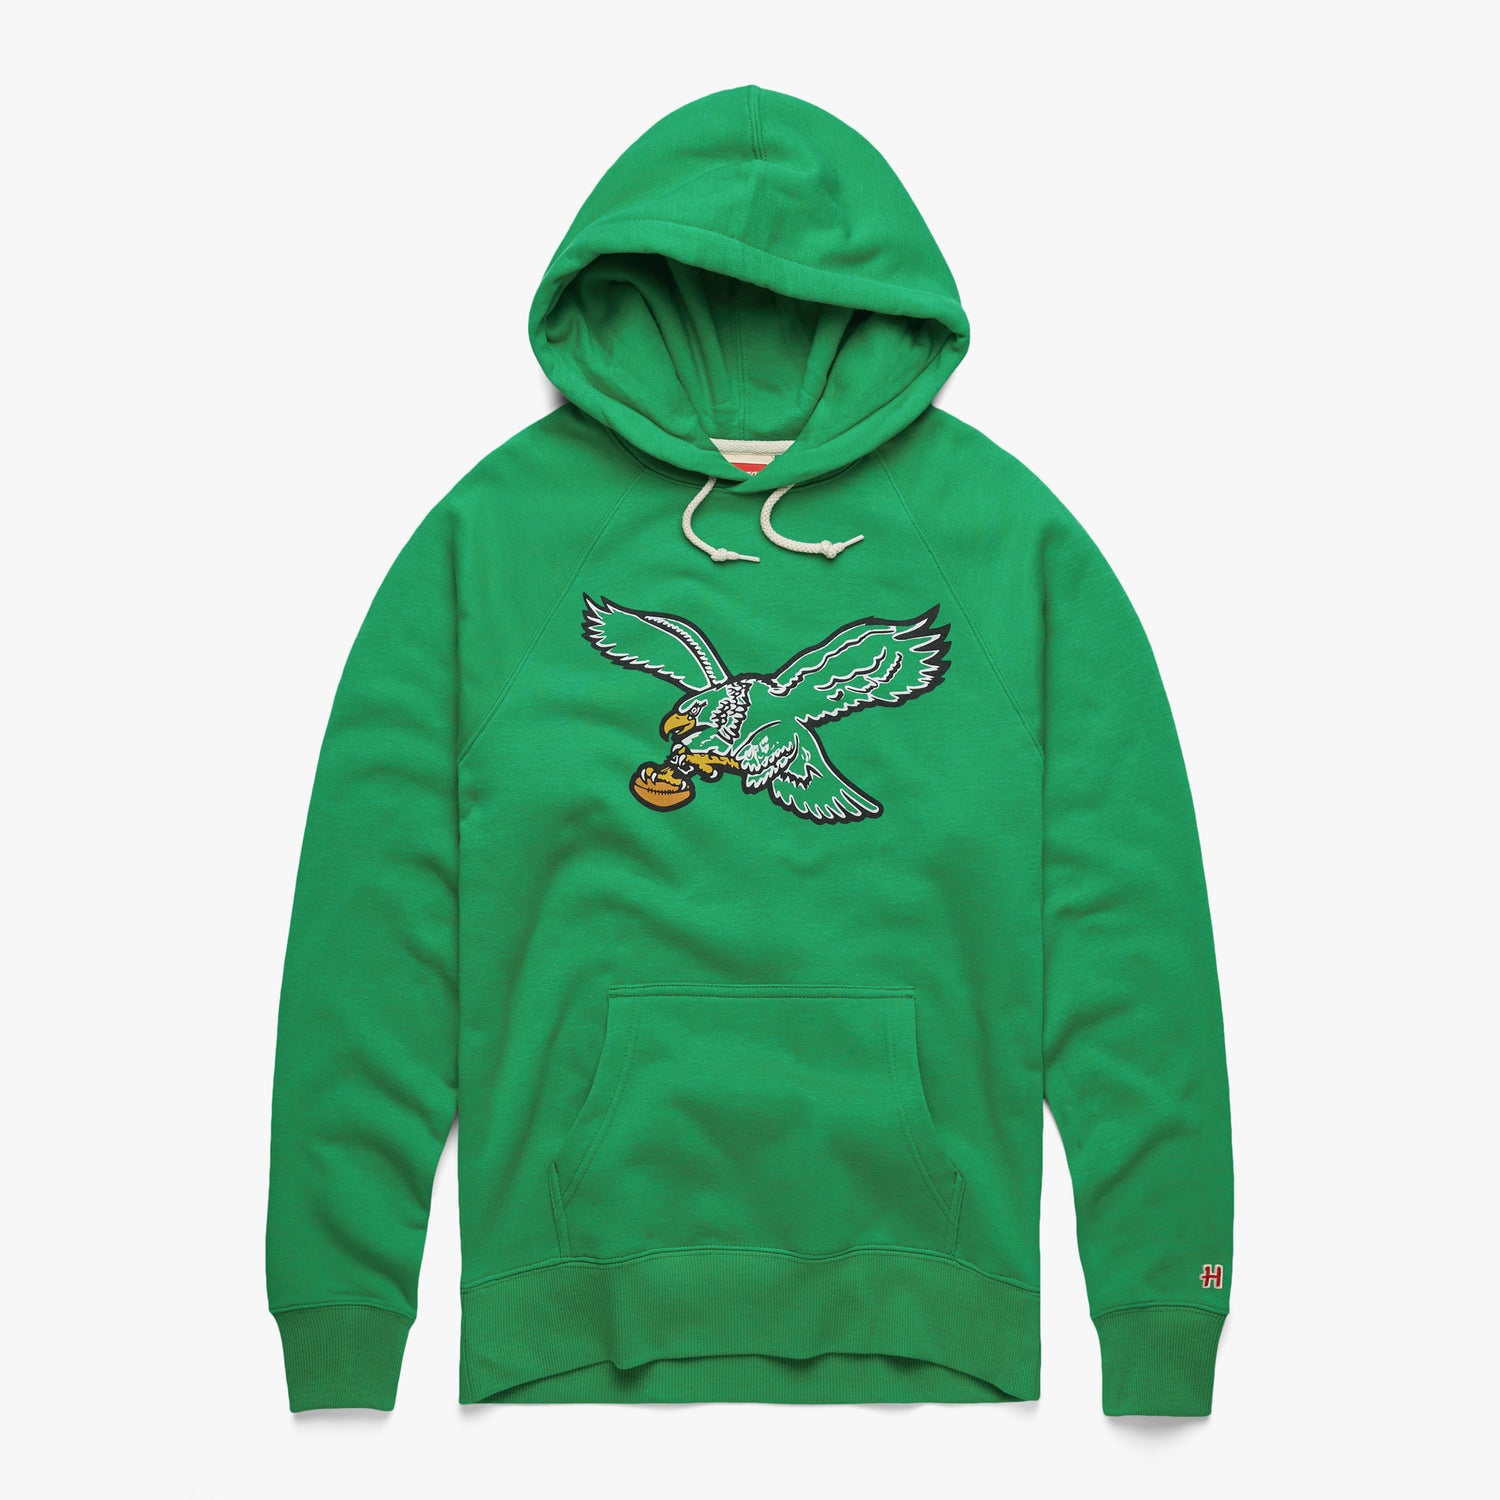 Its A Philly Thing Hoody (Eagles Kelly Green)